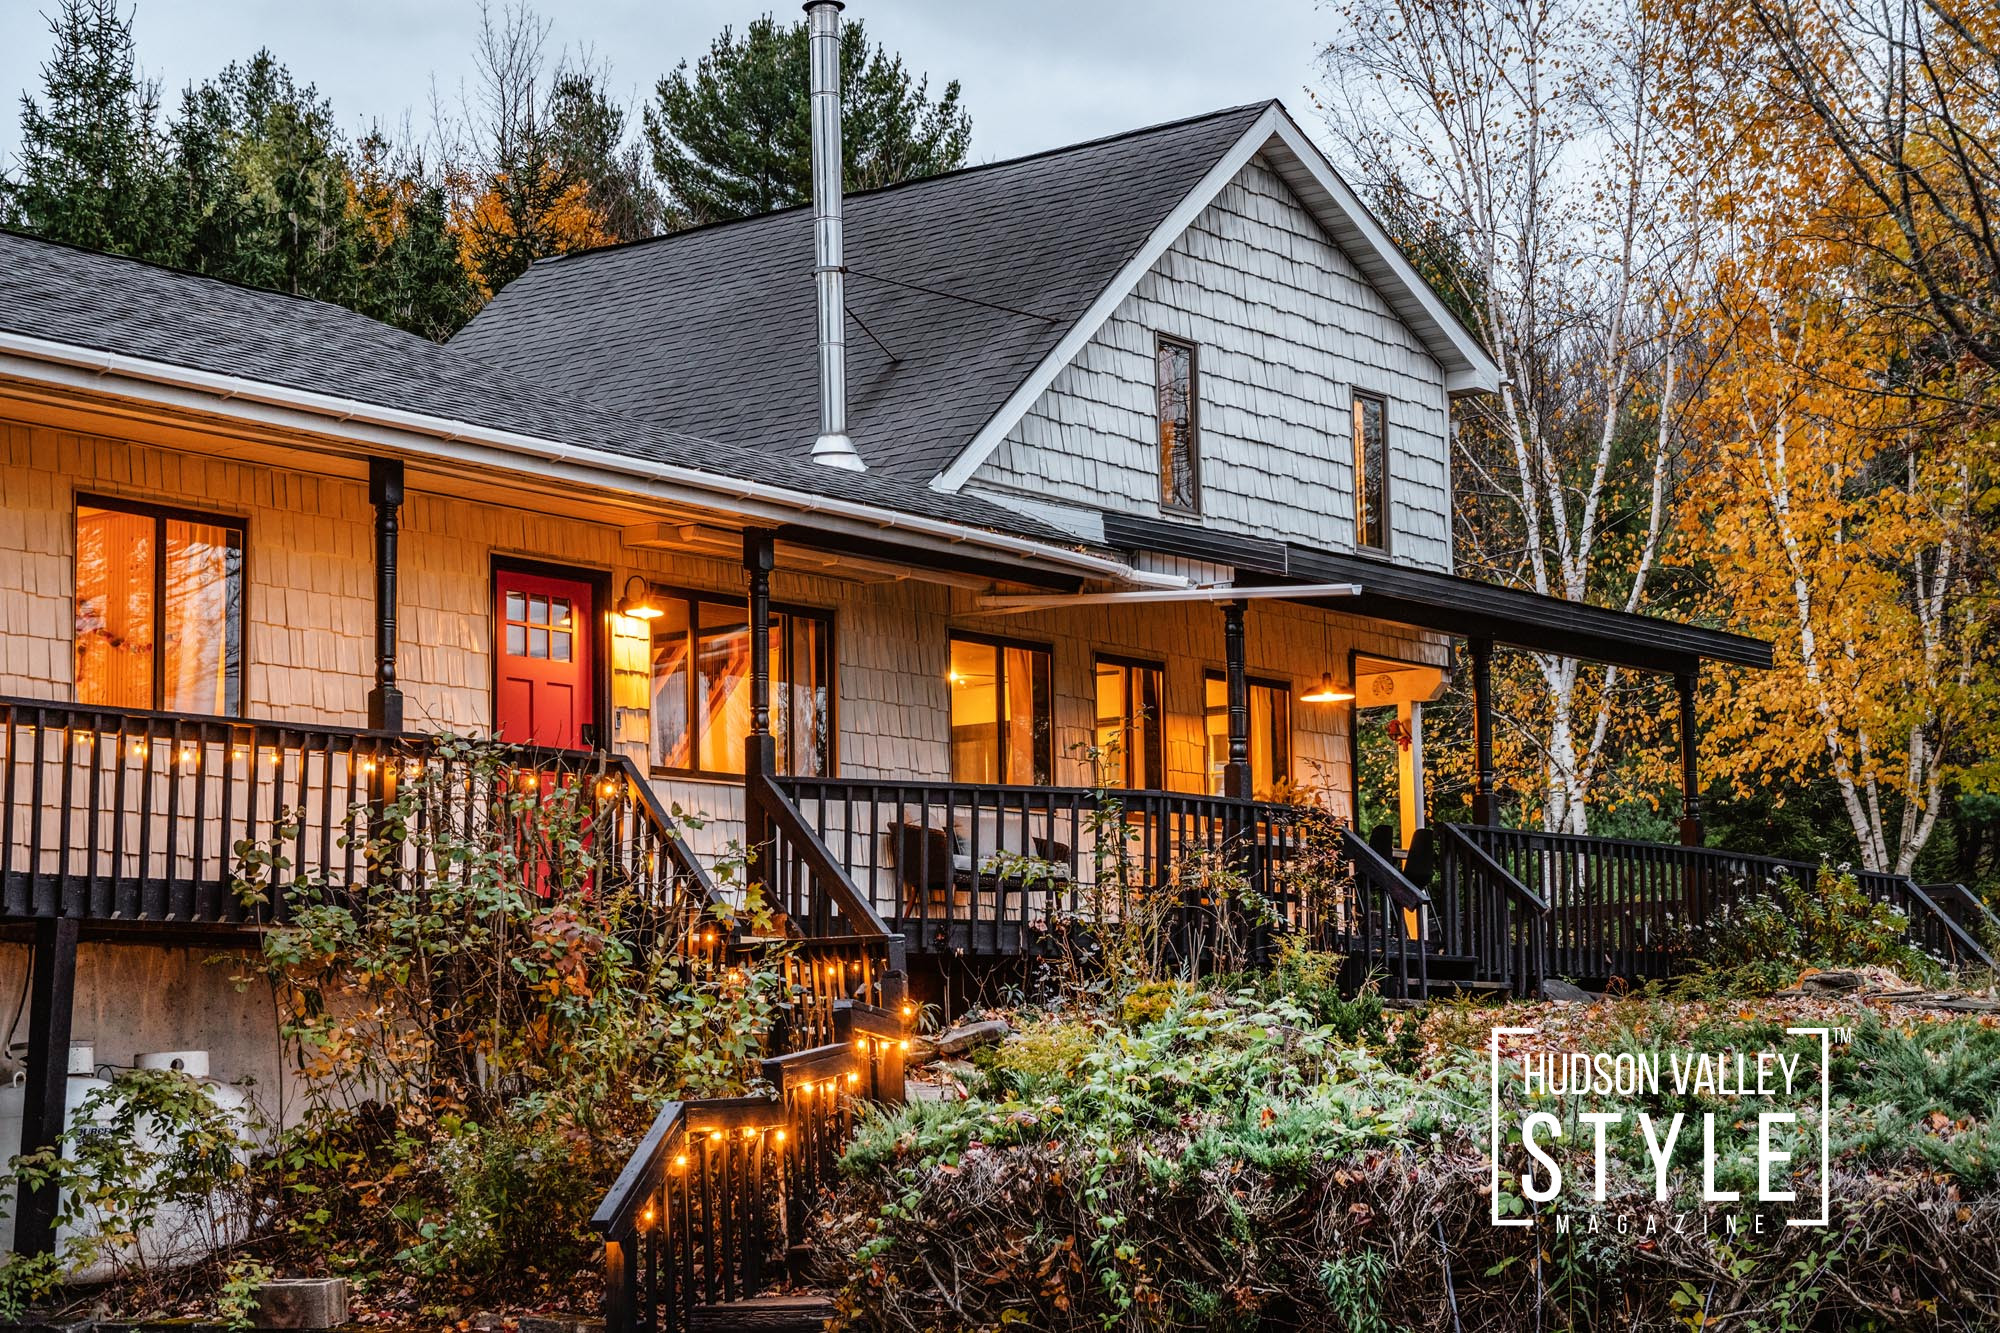 Discover a fixer-upper style Airbnb farmhouse for your vacation rental in Upstate, NY – Presented by Alluvion Vacations - The Best Airbnb Vacation Rentals in the Hudson Valley and Catskills